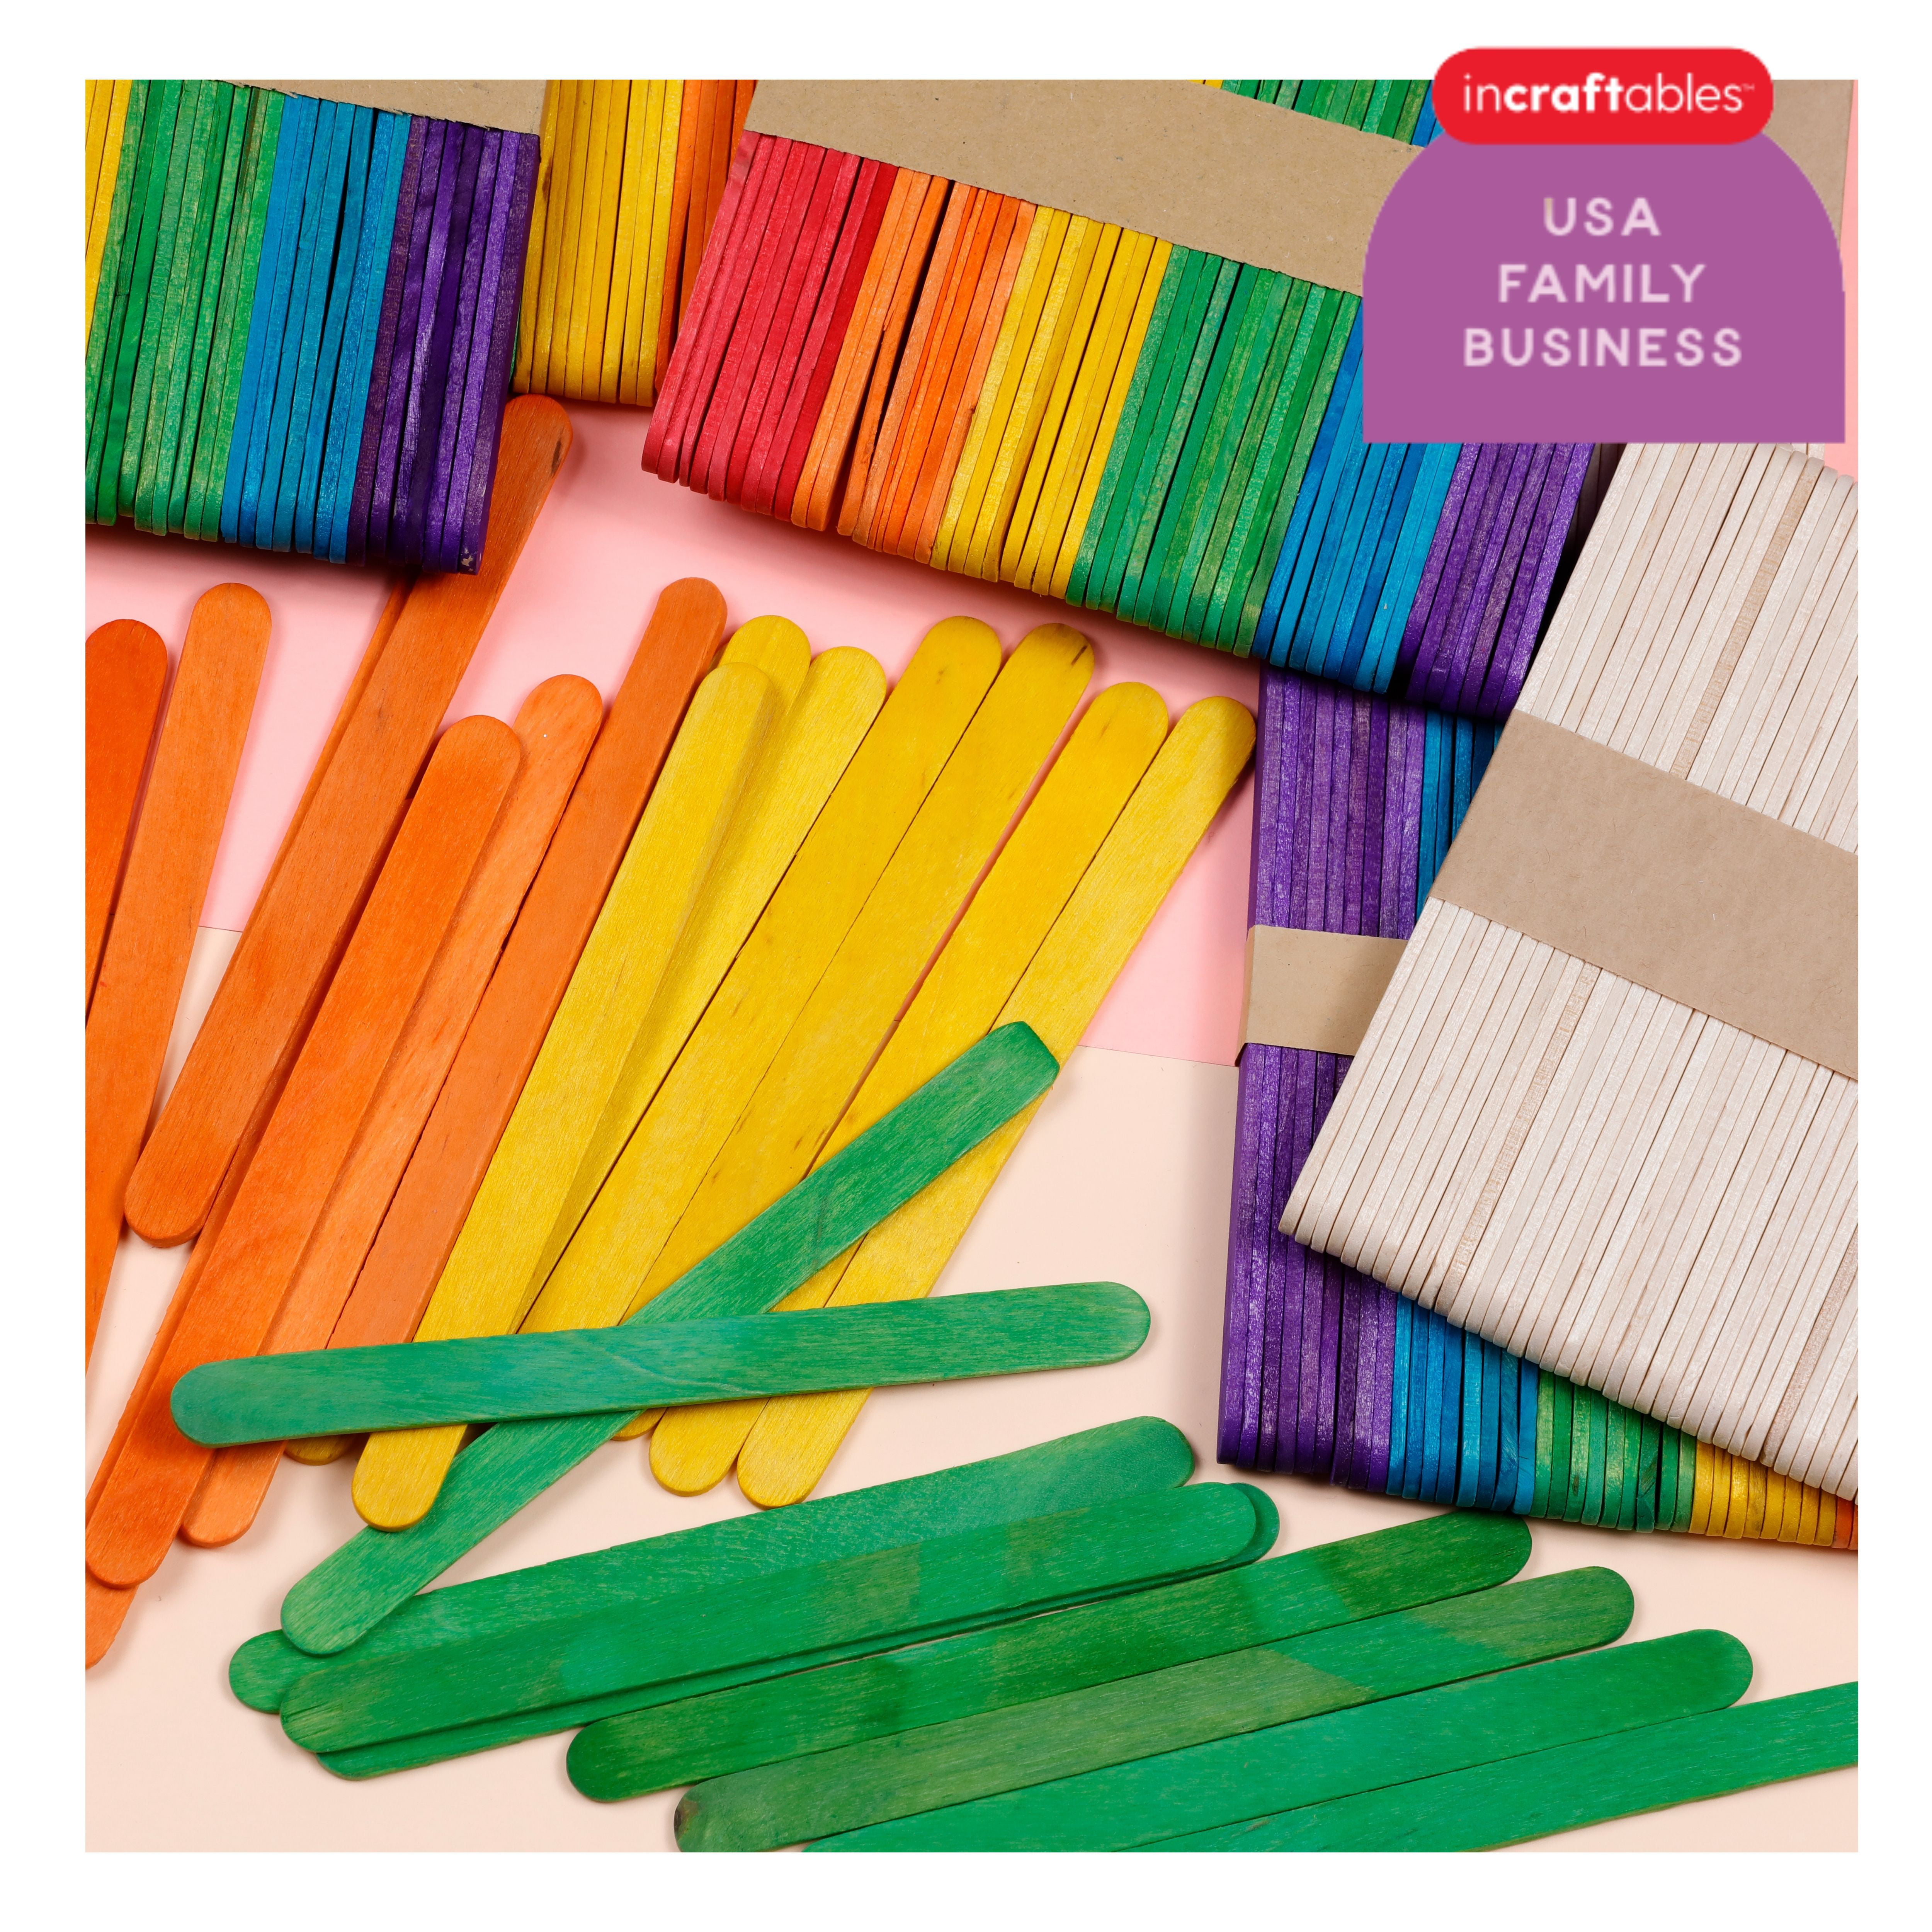 DIRBUY 600 Pcs Colored Sawtooth Wood Craft Sticks - 4.5 x 0.4 inch Assorted  Color Interlock Popsicles Sticks - Notched Popsicle Sticks for Crafts